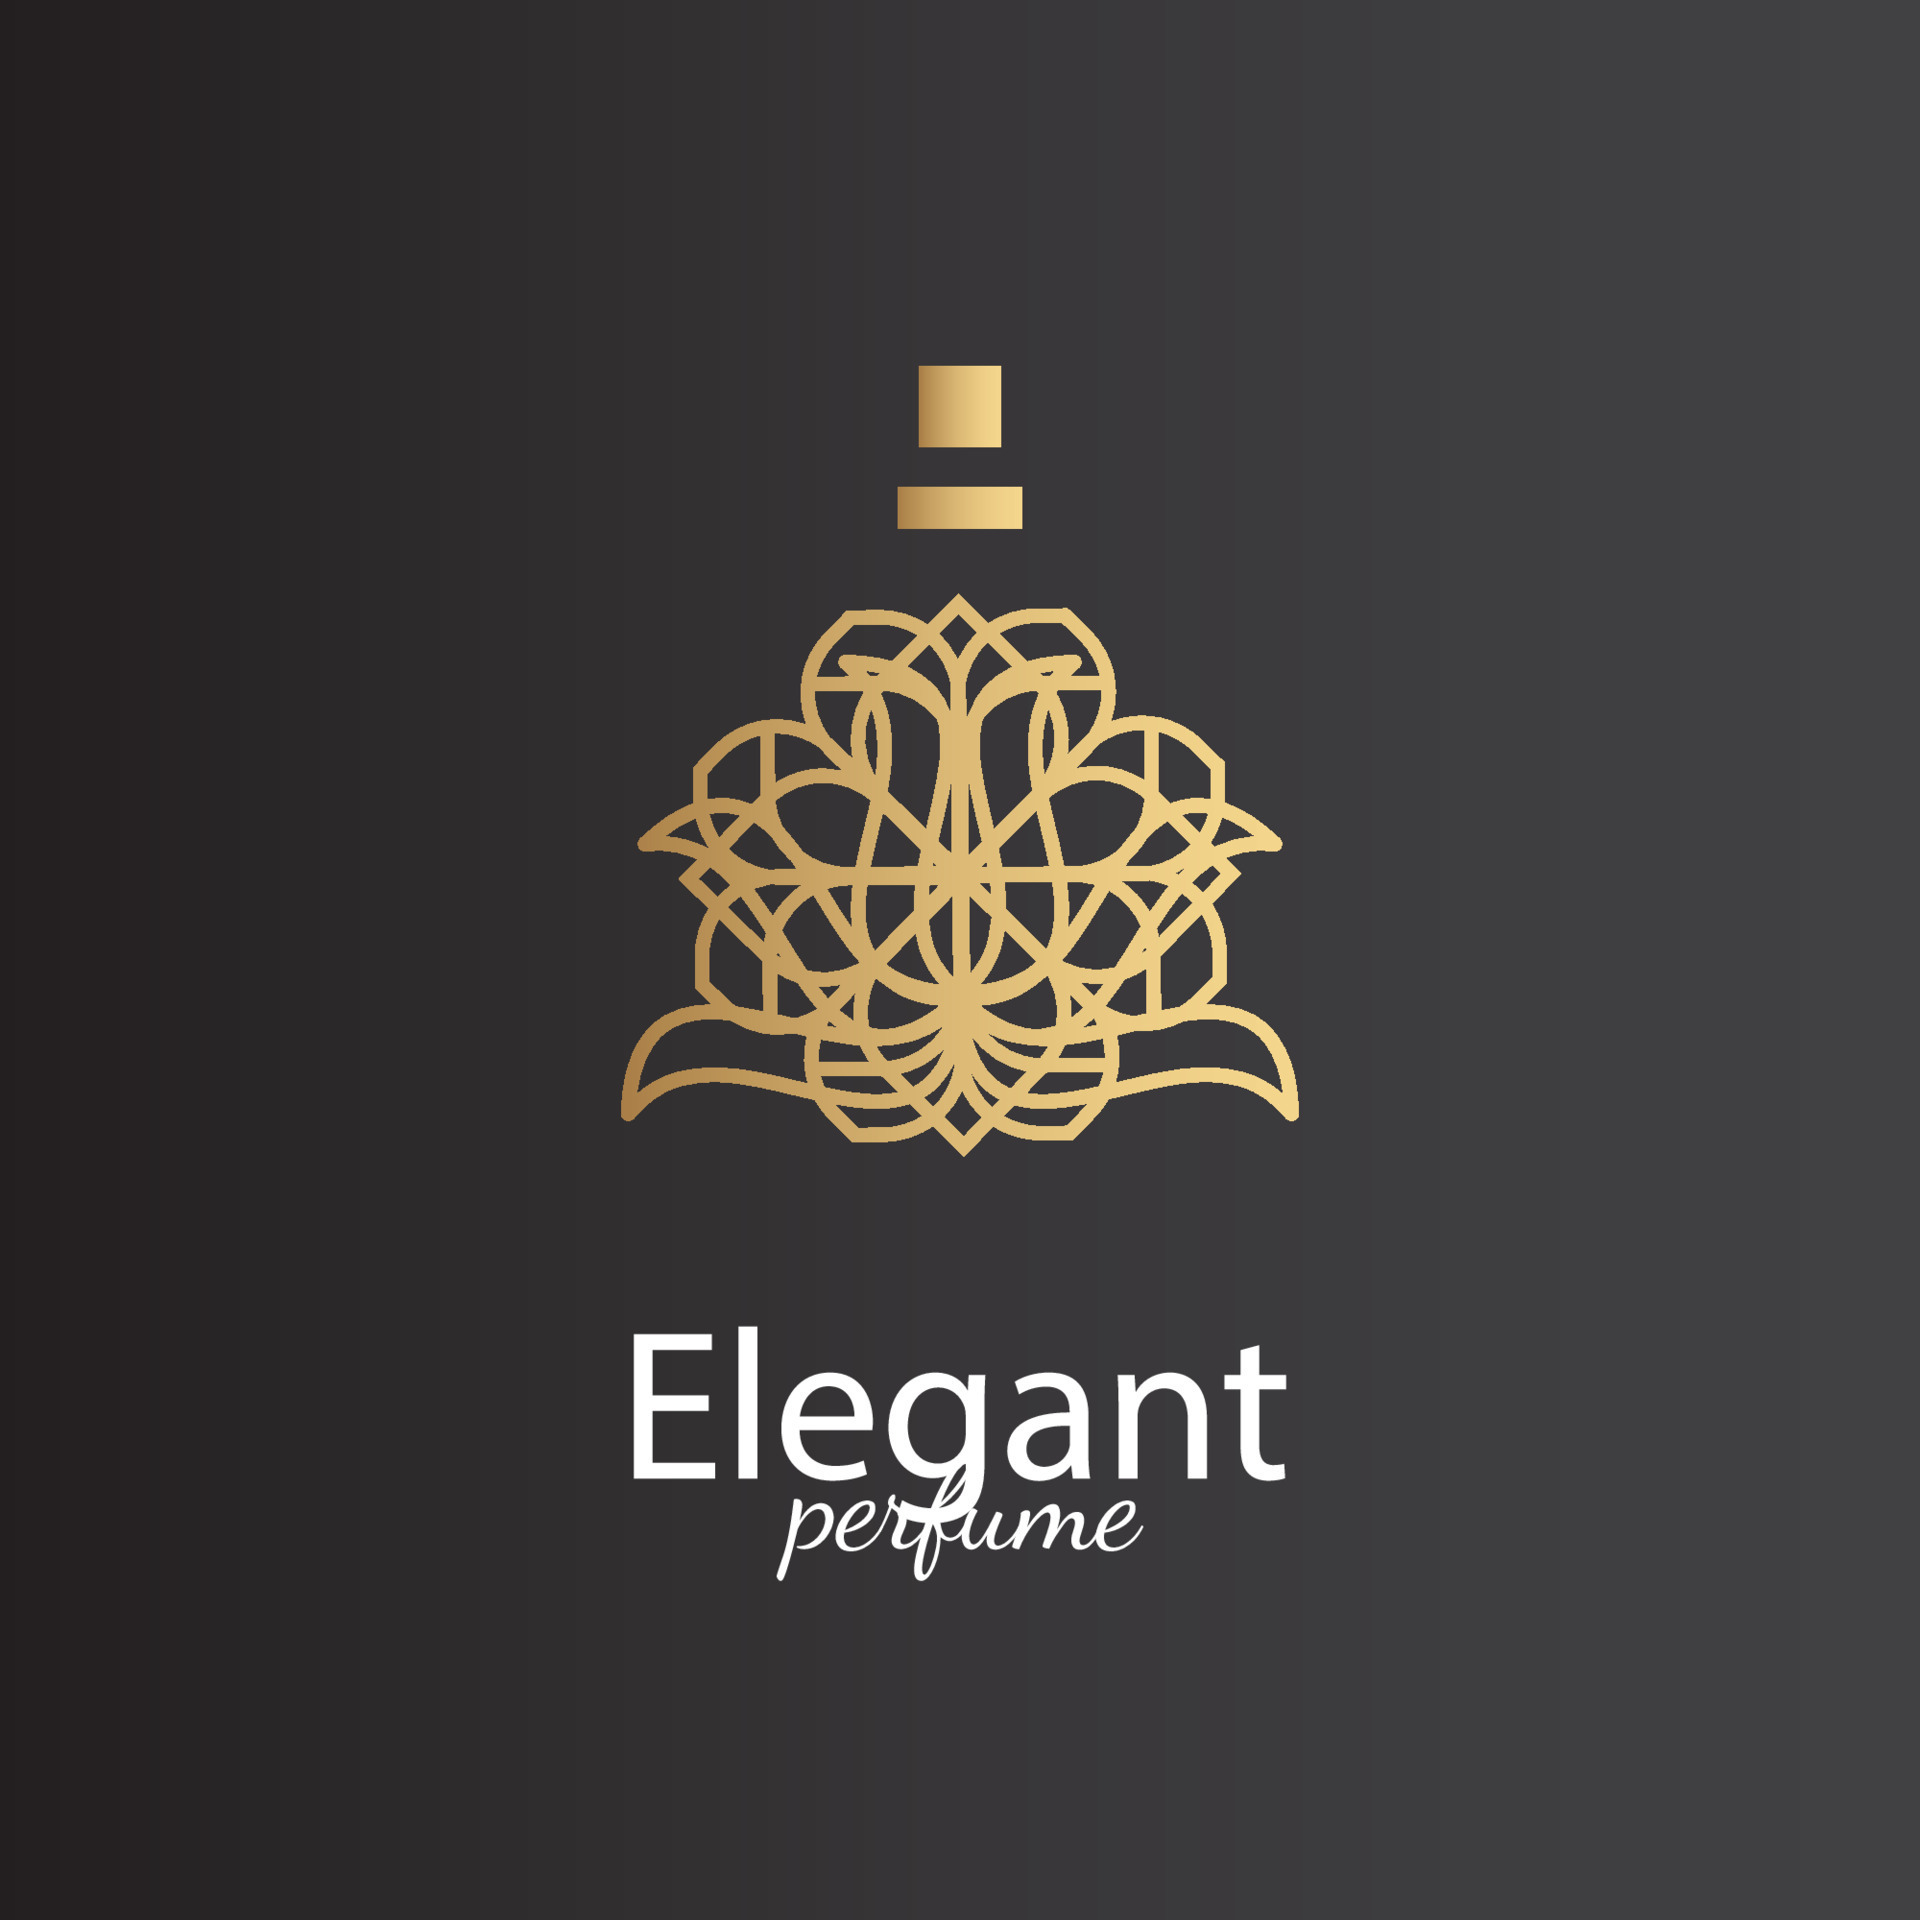 perfume logo, unique and luxurious logo. can be used for luxury